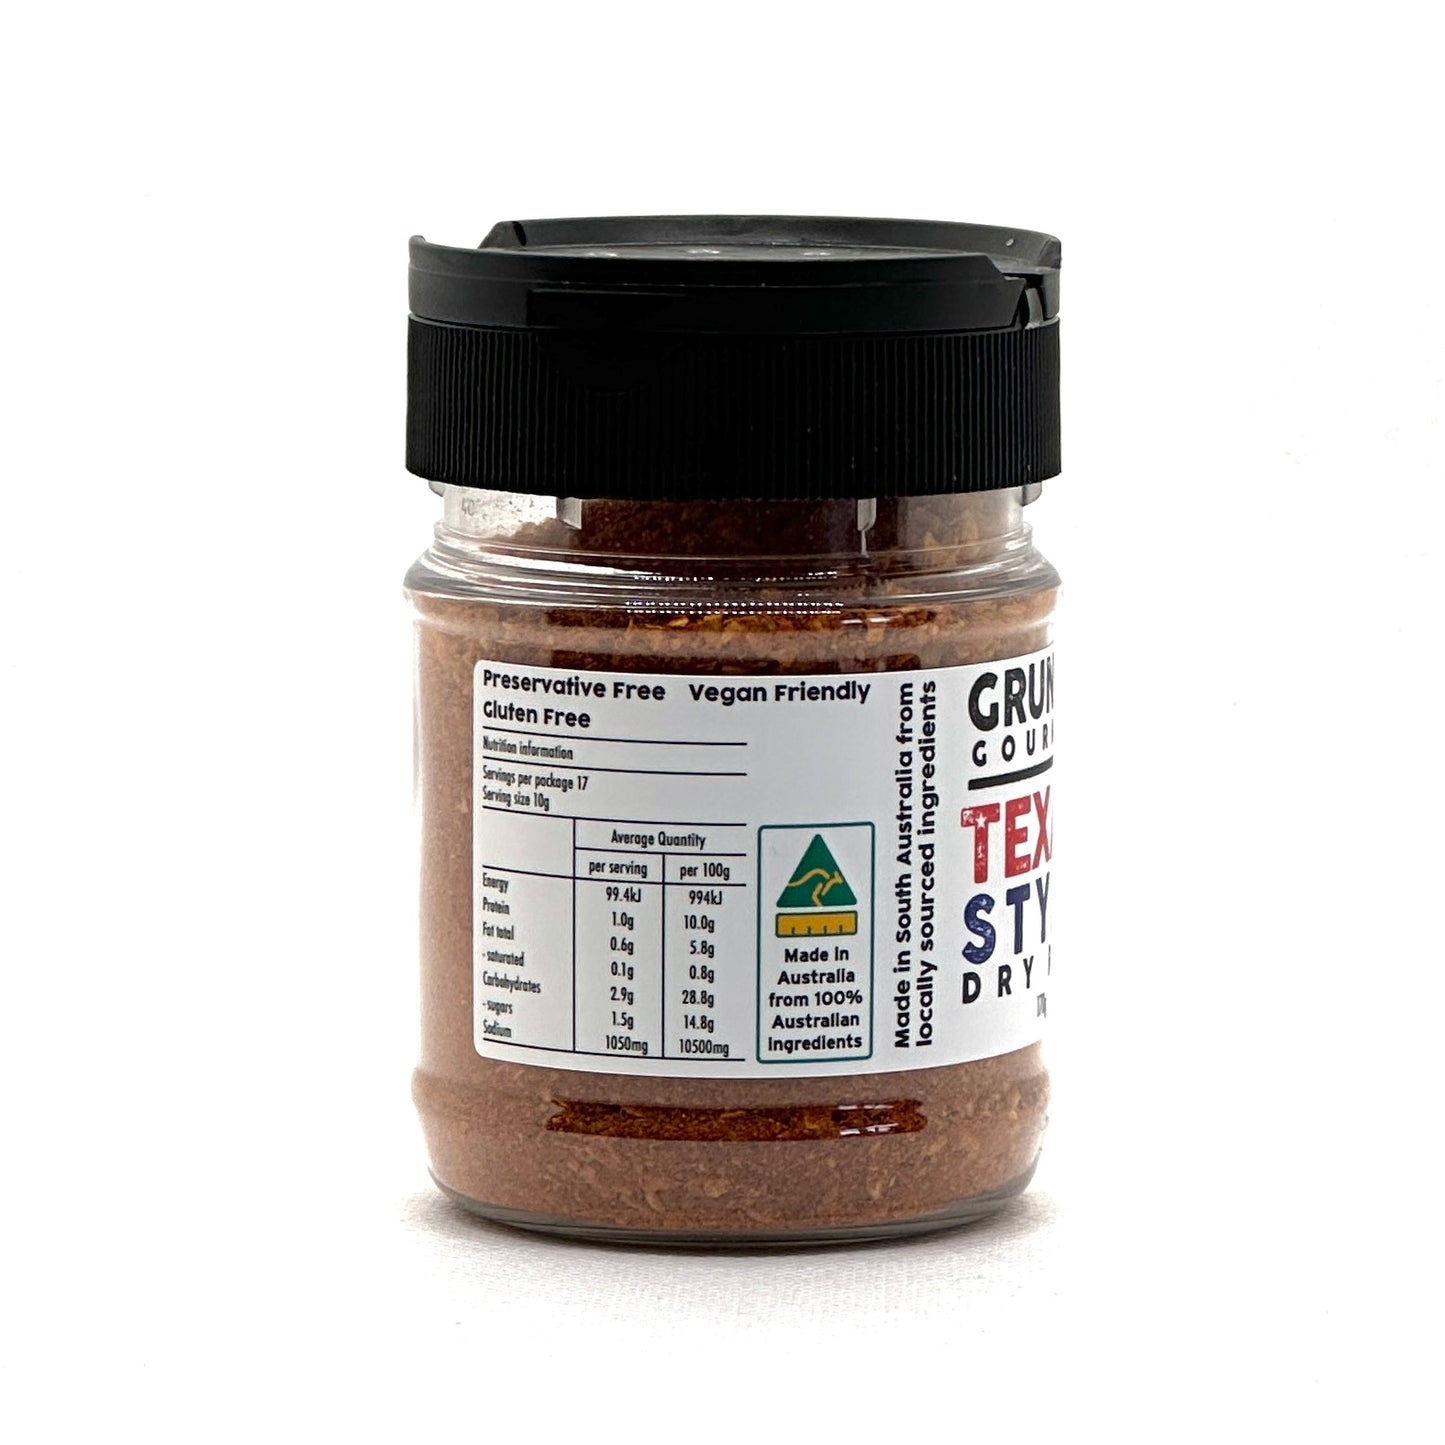 Grund's Gourmet Texas Style Dry Rub in action, seasoning a variety of meats for grilling and smoking, showcasing its rich ingredients like garlic and chili powder for the ultimate BBQ experience